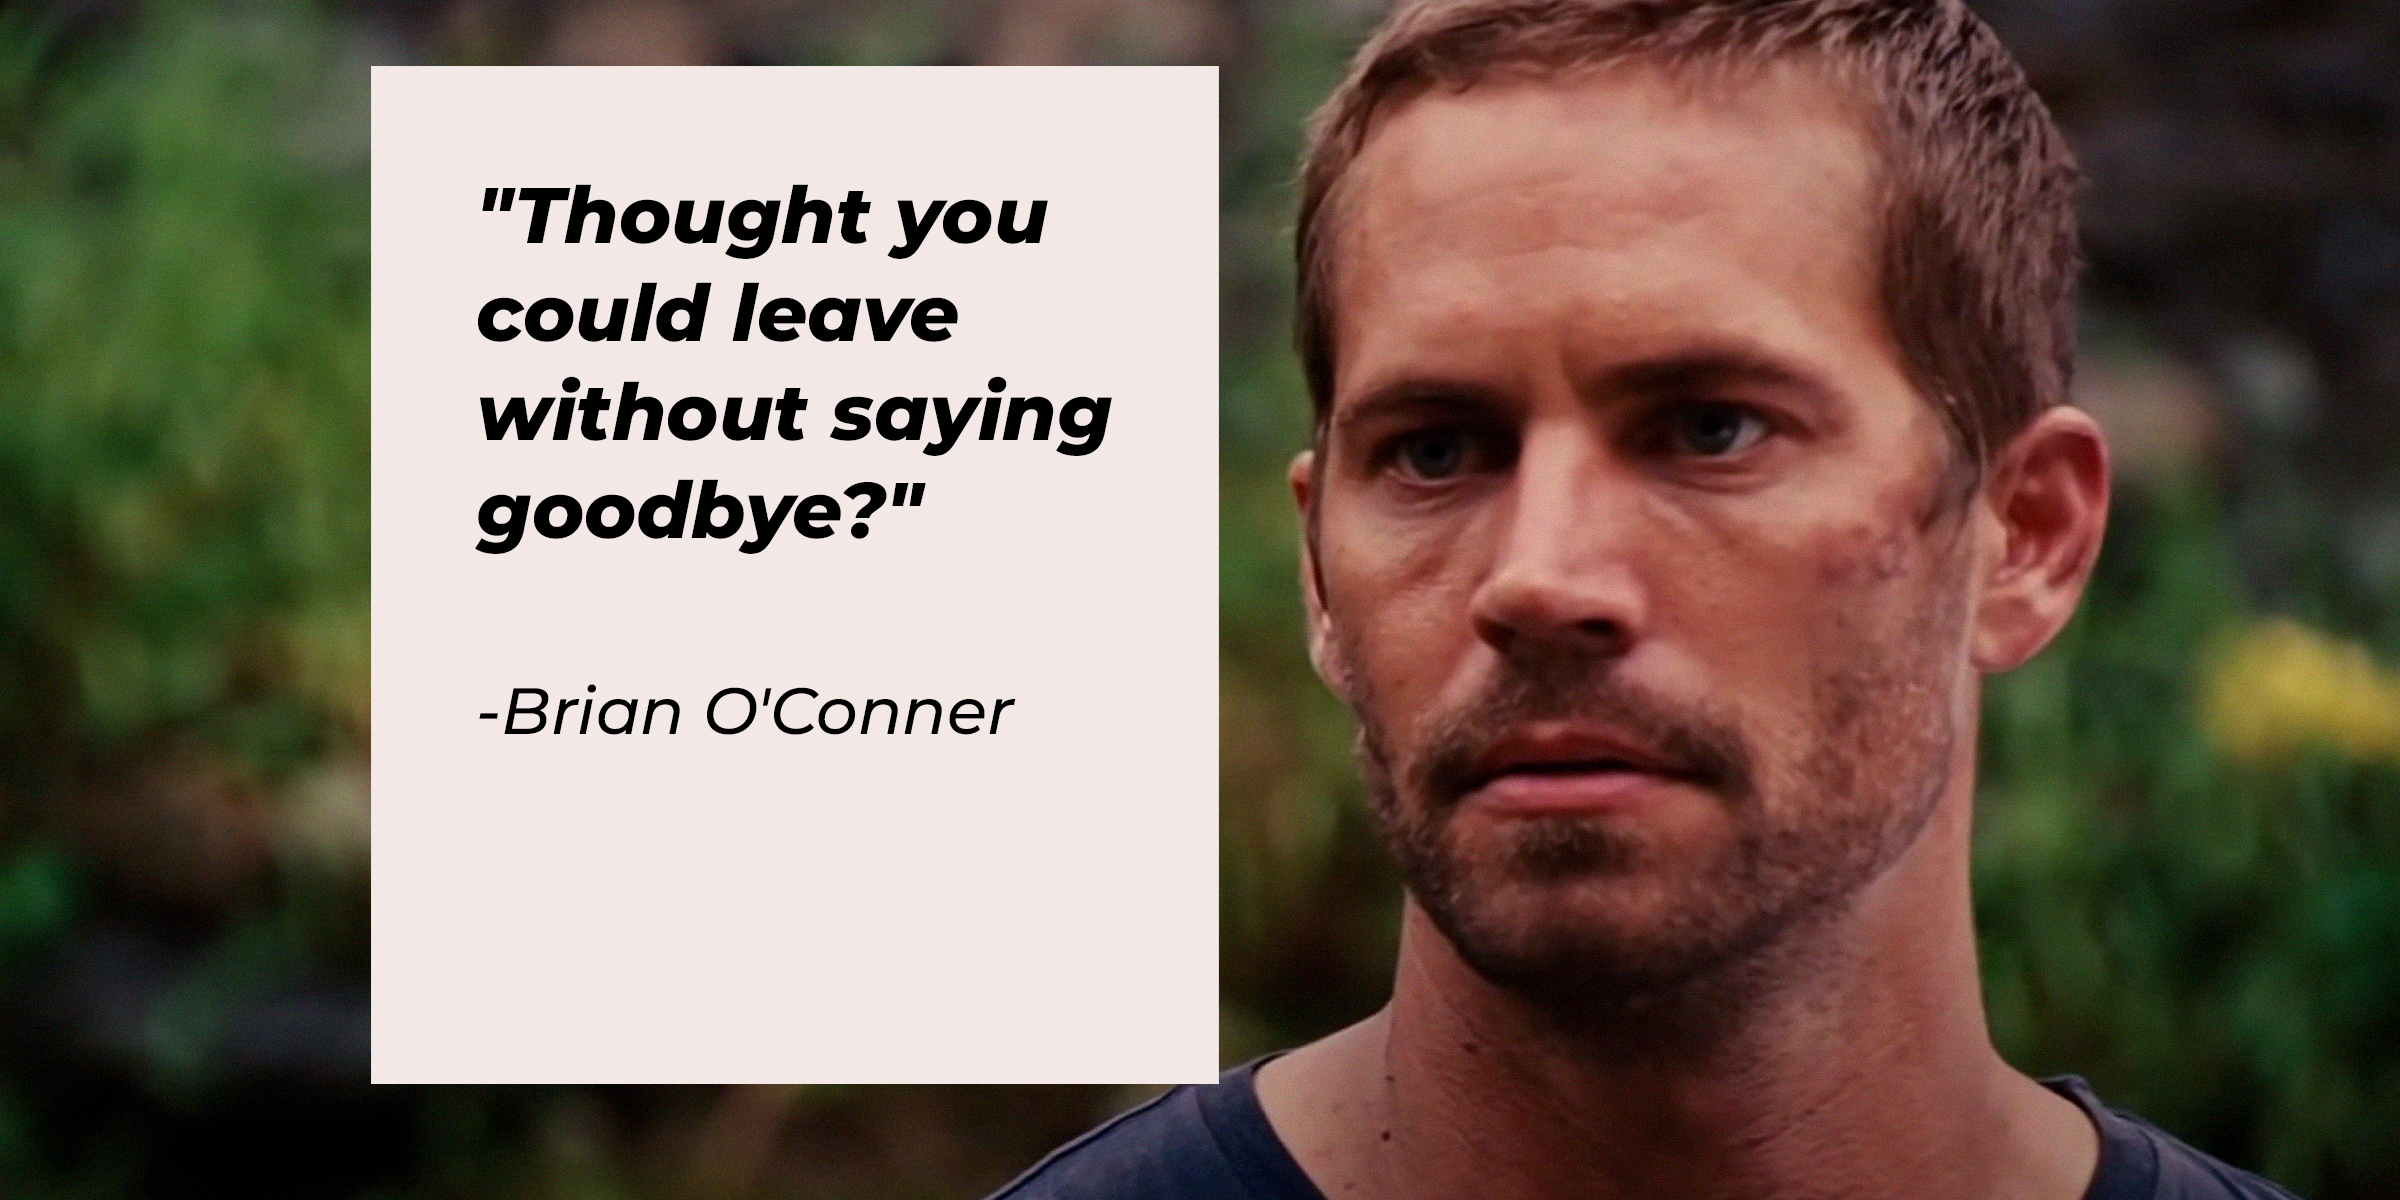 Brian O'Conner, with his quote: "Thought you could leave without saying goodbye?" | Source: facebook.com/TheFastSaga